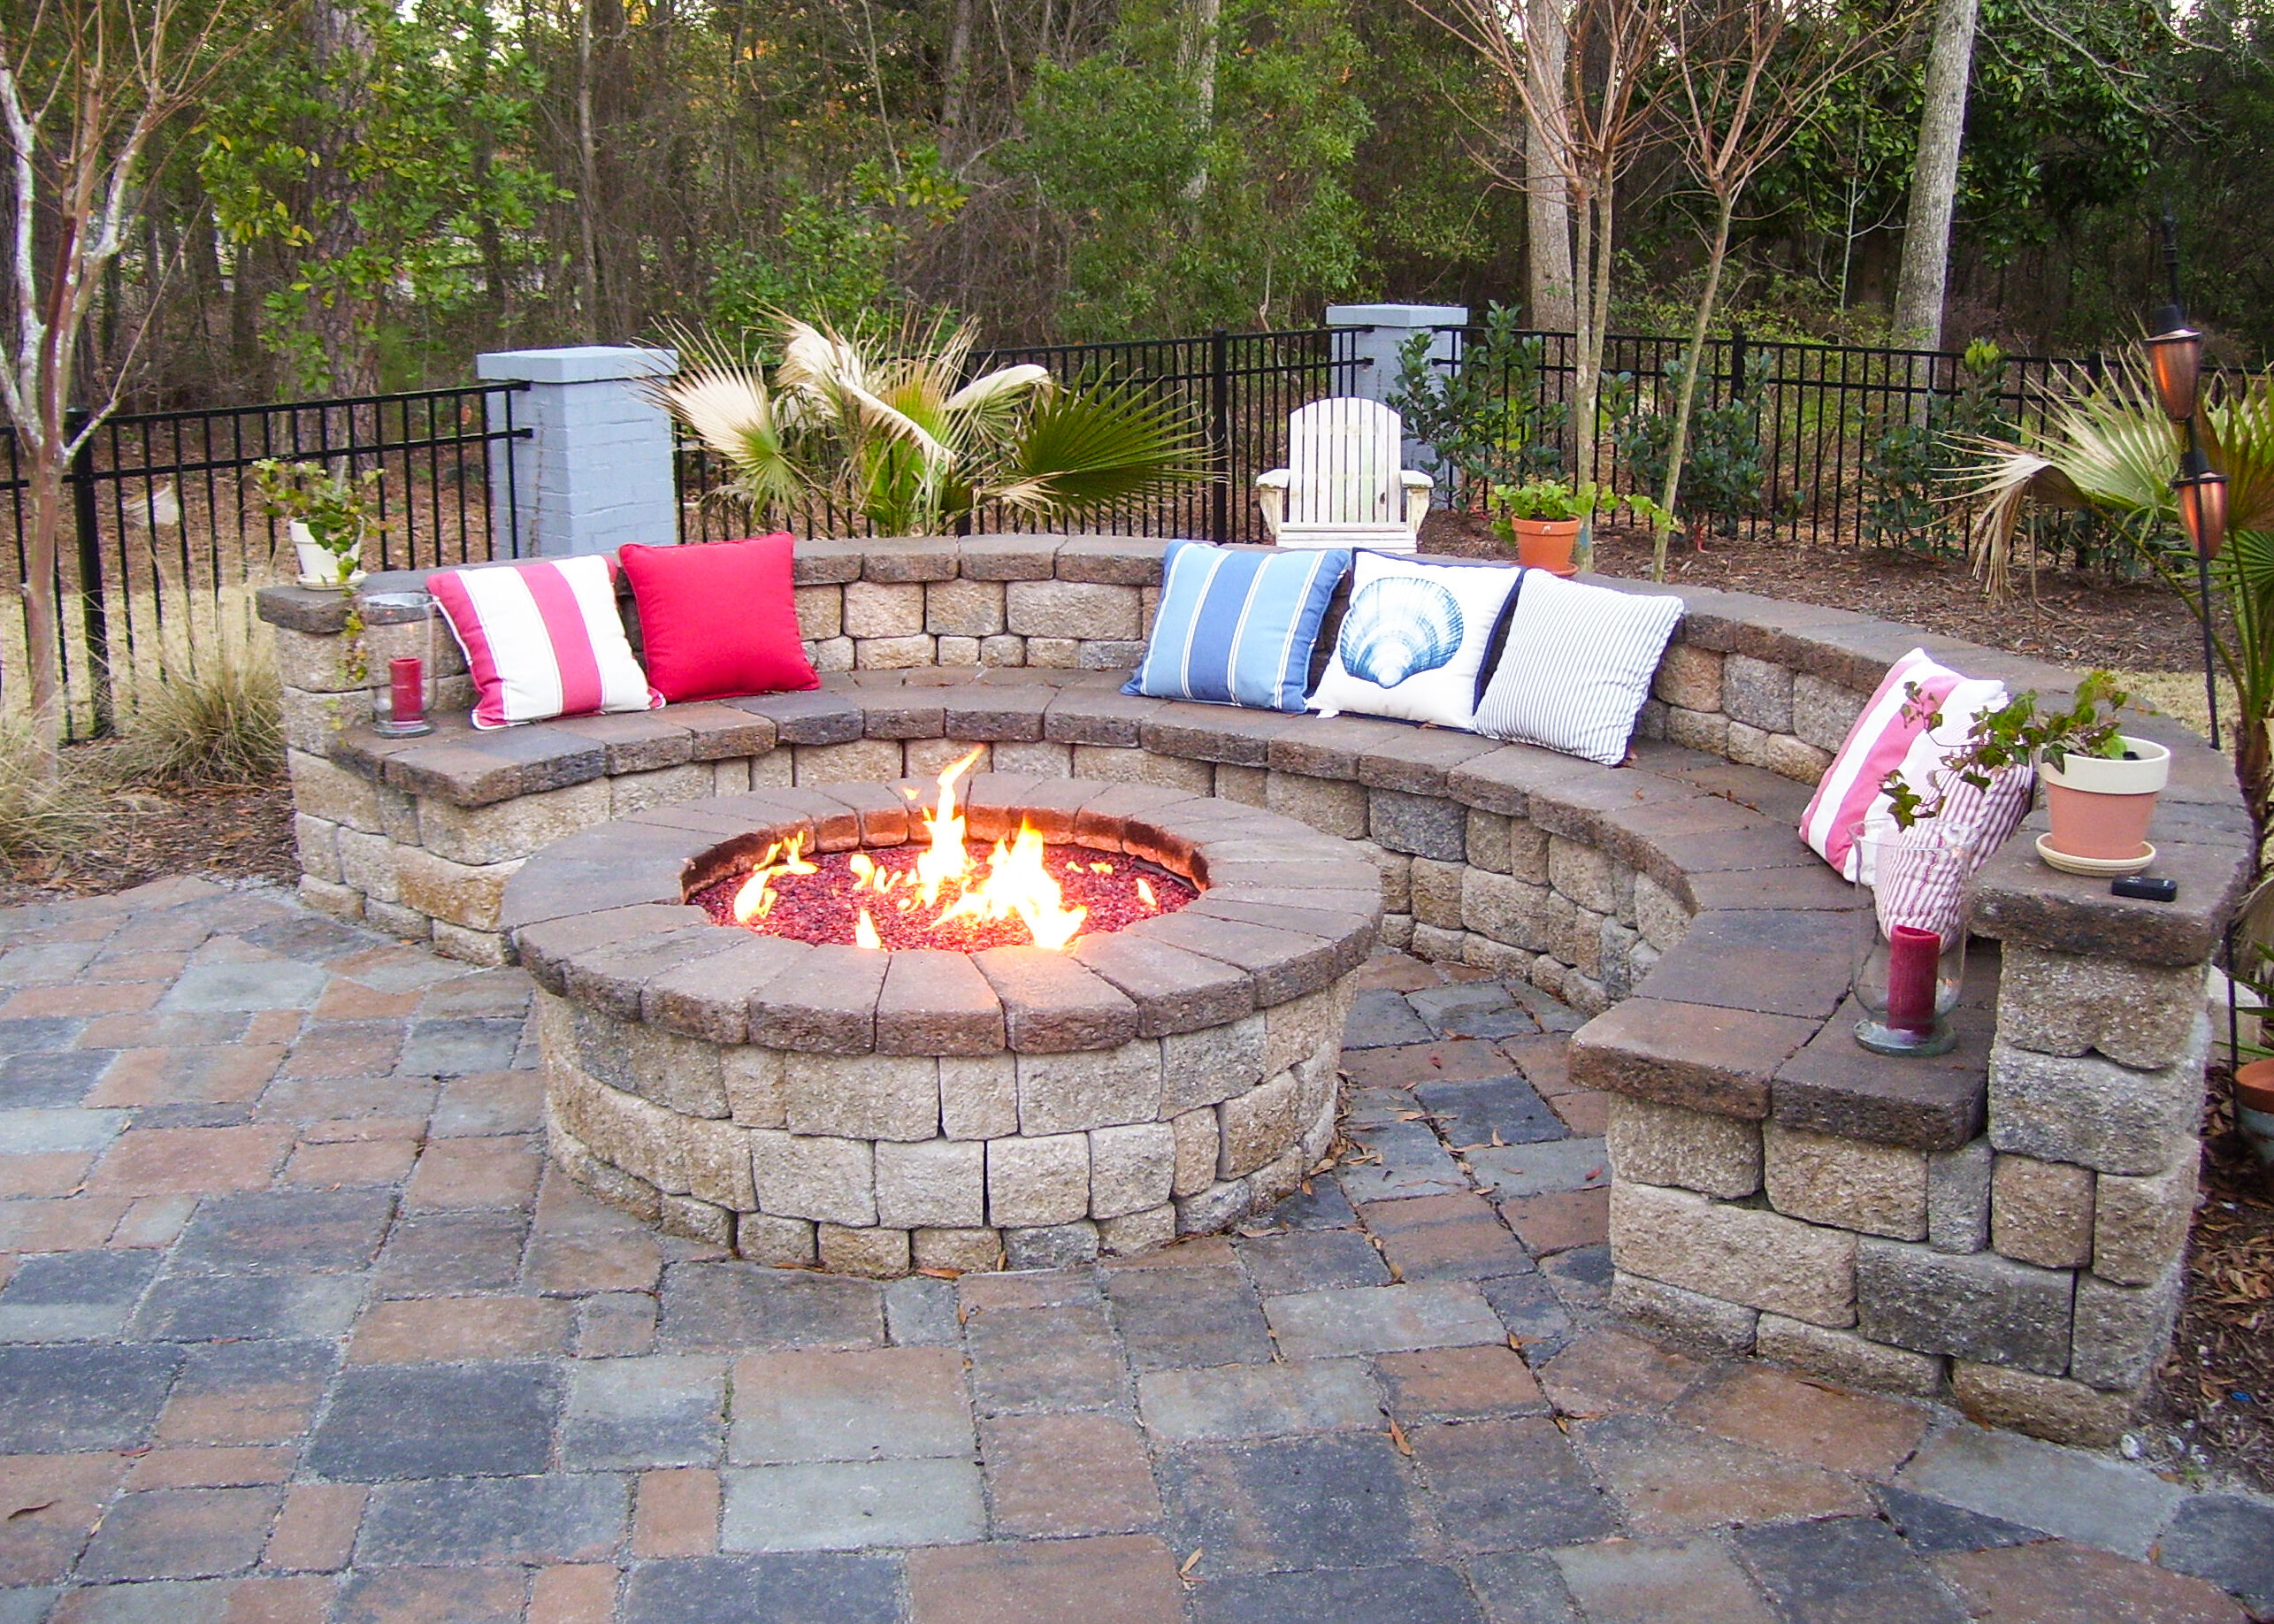 3 Easy Diy Fire Pit Ideas, Build Your Own Gas Fire Pit Kit